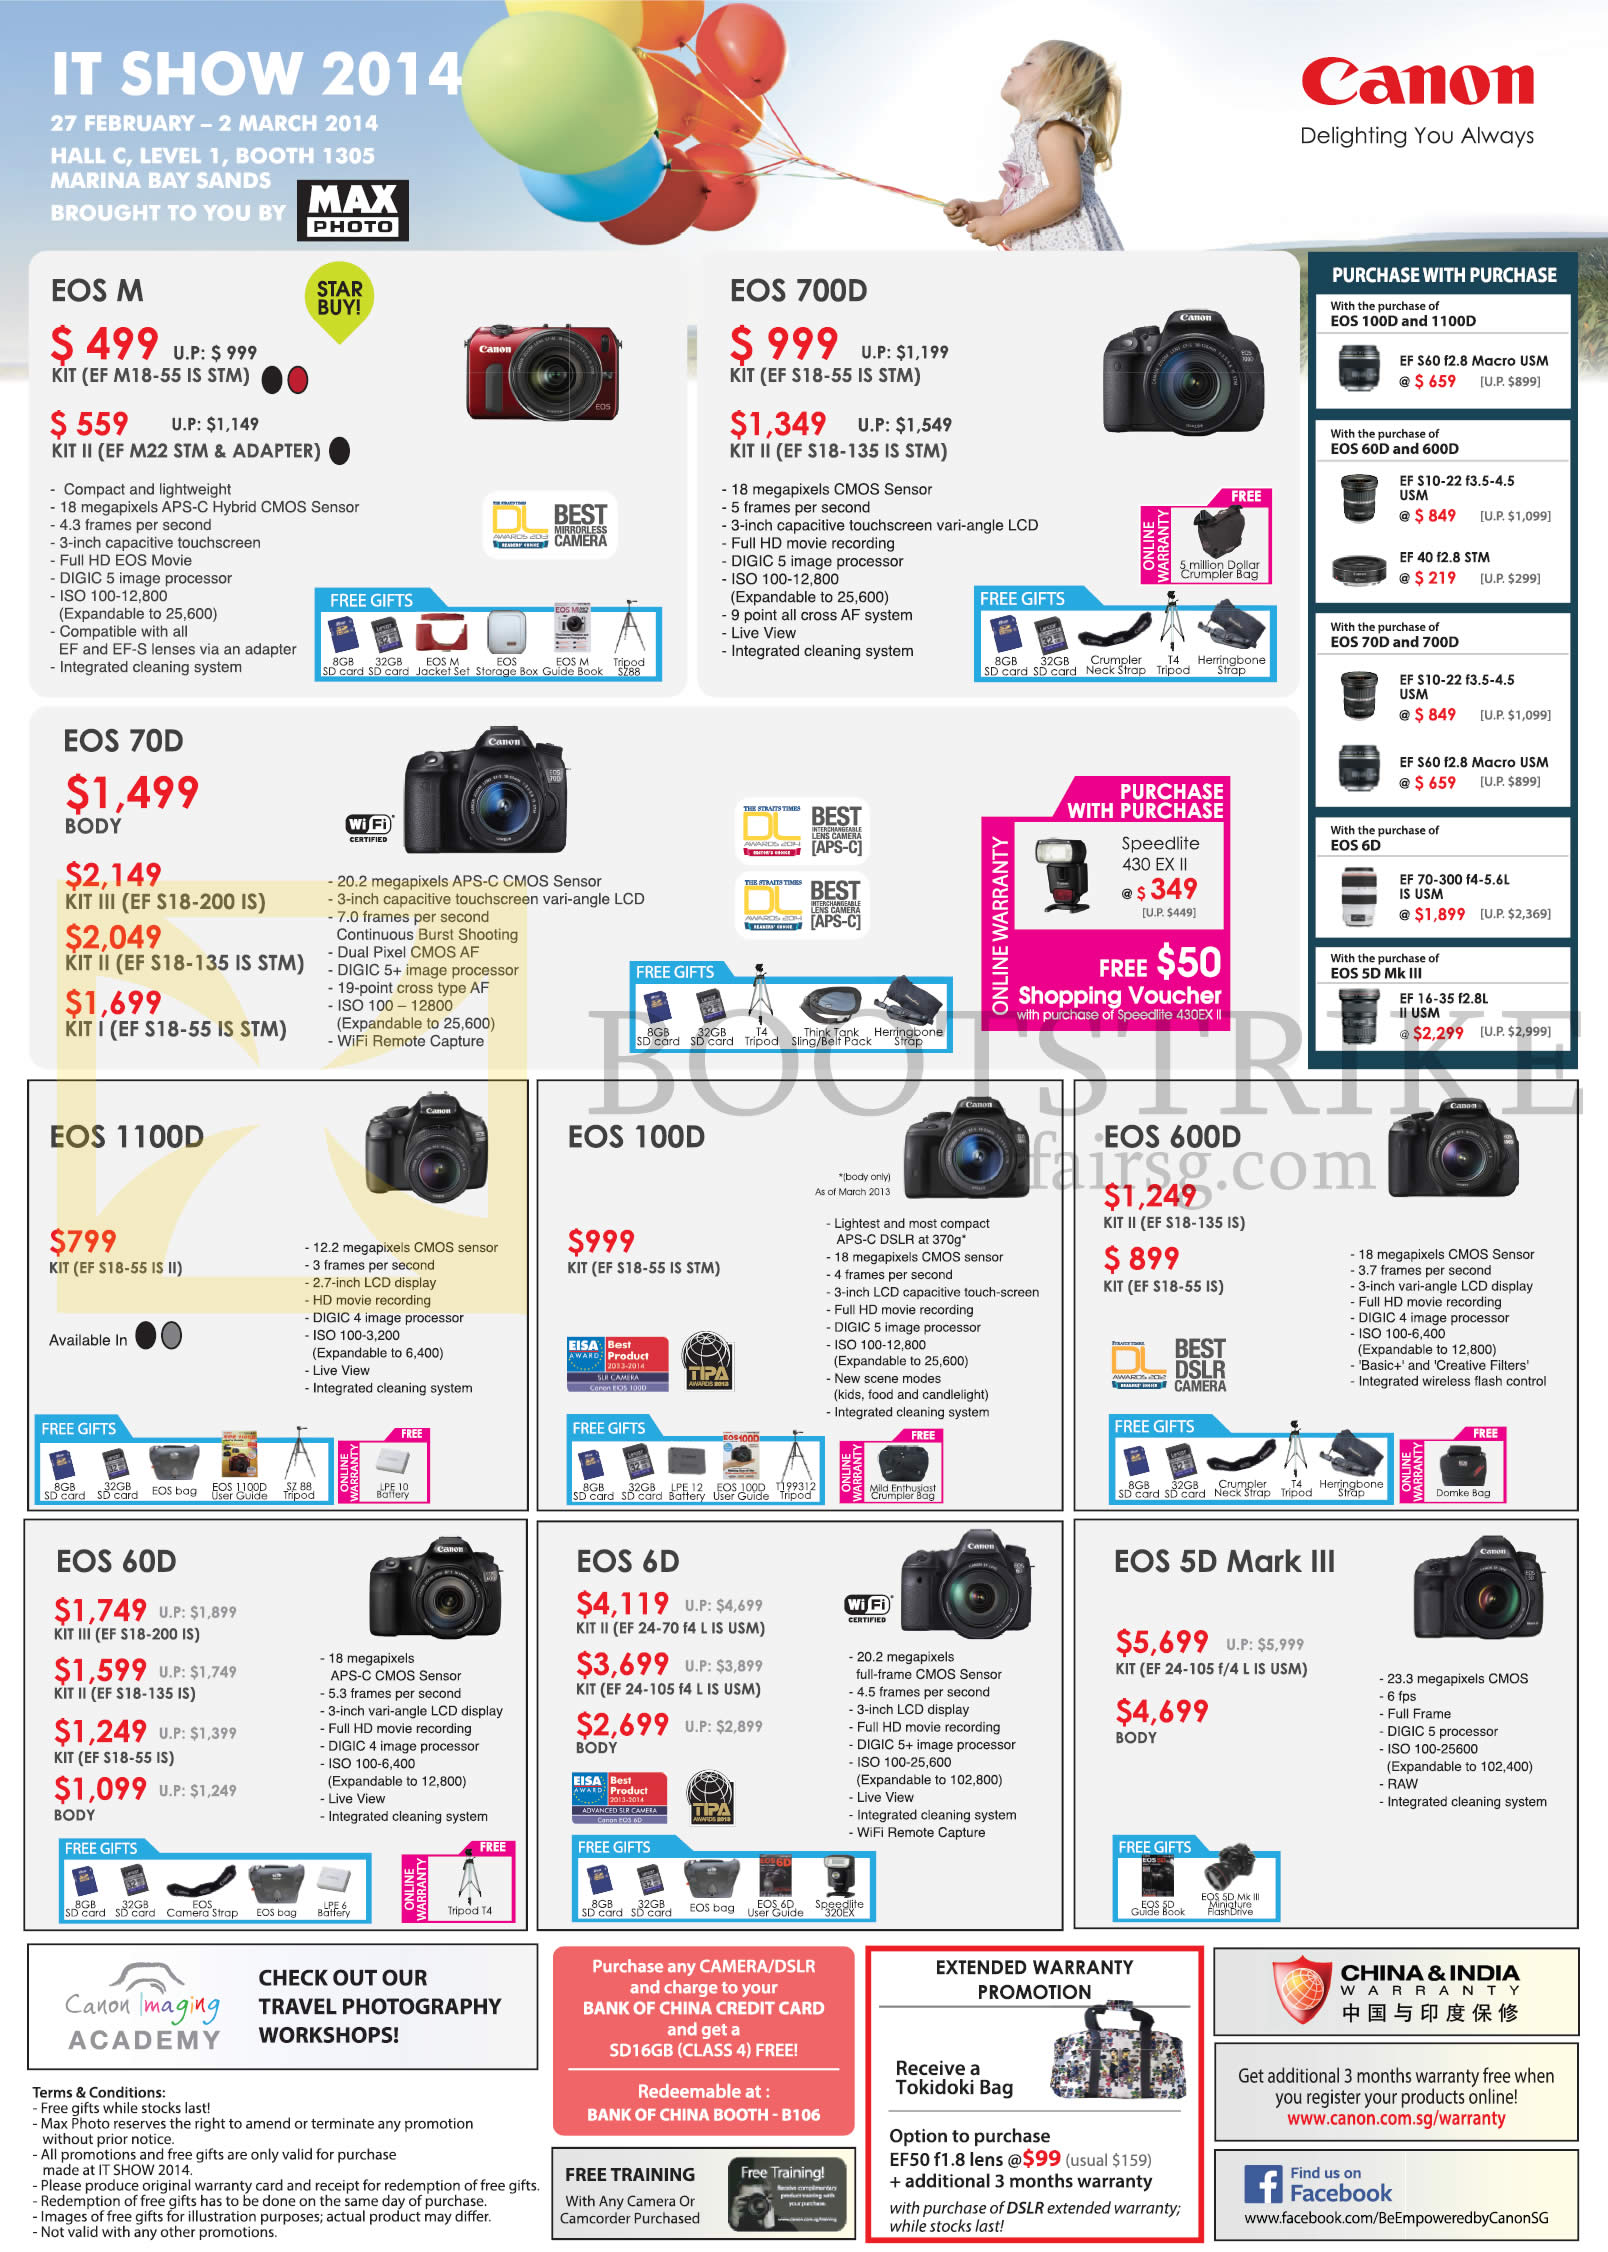 IT SHOW 2014 price list image brochure of Canon DSLR Digital Cameras EOS M, 700D, 70D, 1100D, 100D, 600D, 60D, 6D, 5D Mark III